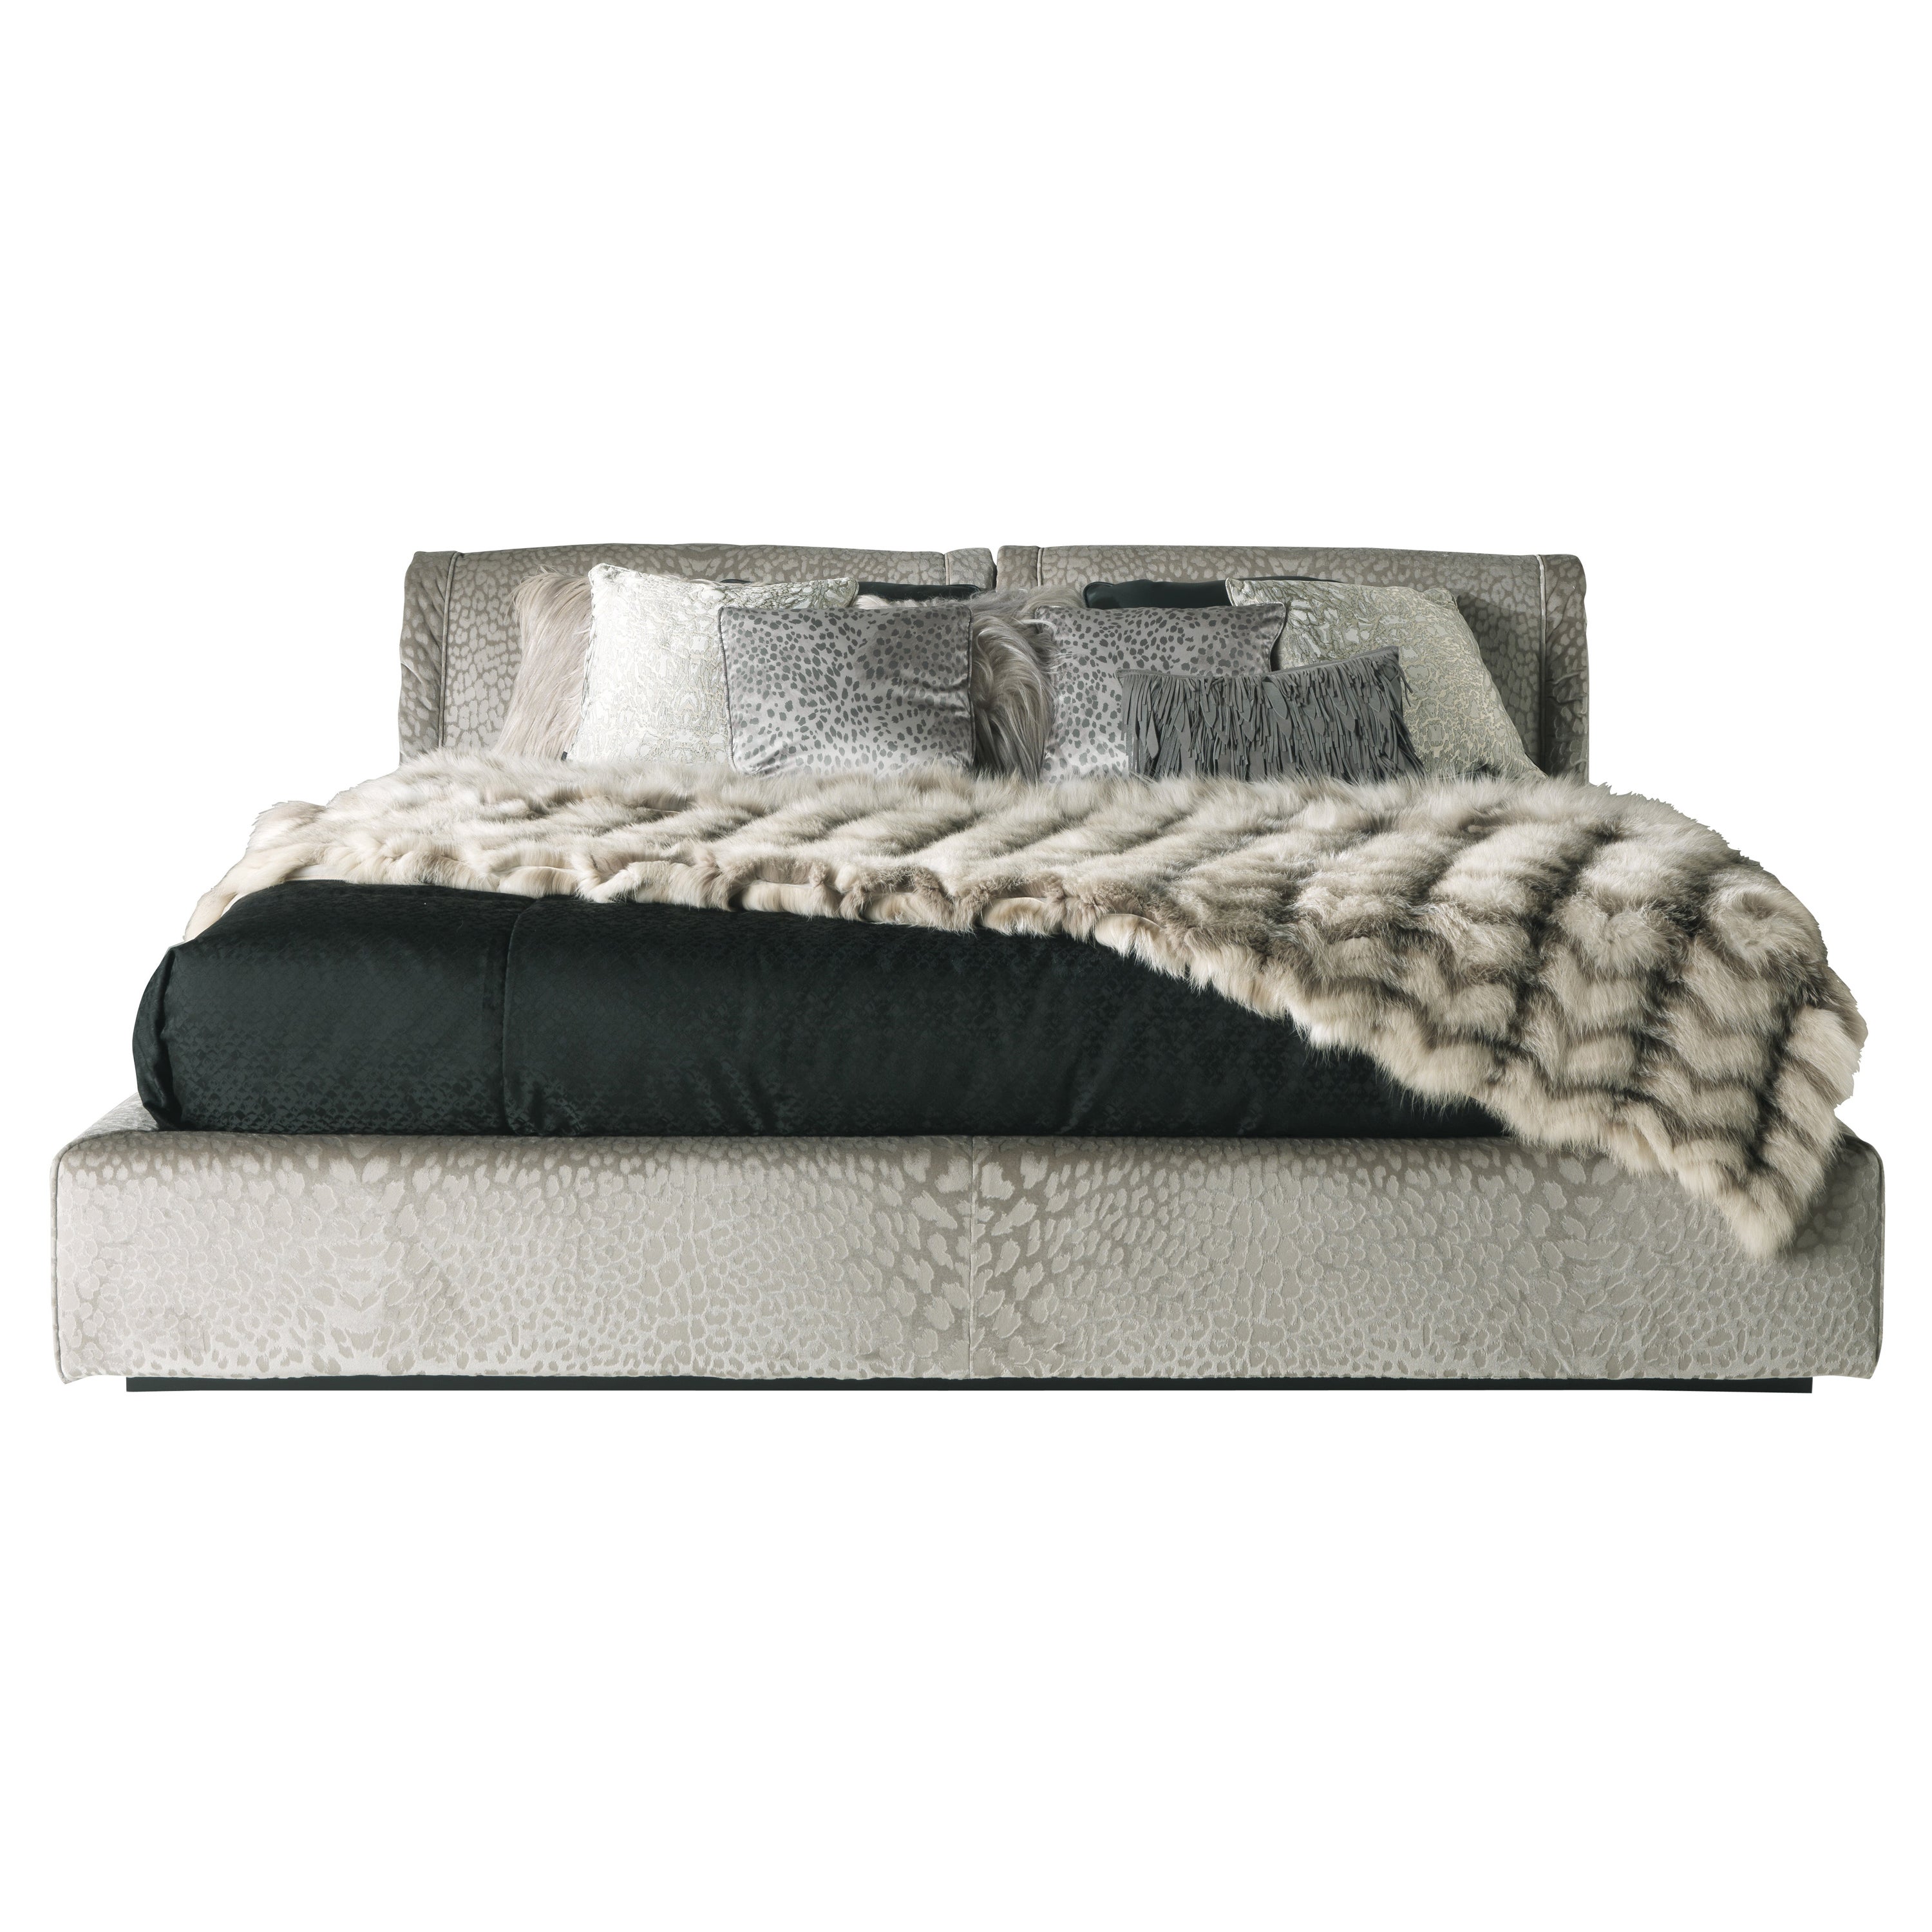 21st Century Smoking Bed in Fabric by Roberto Cavalli Home Interiors